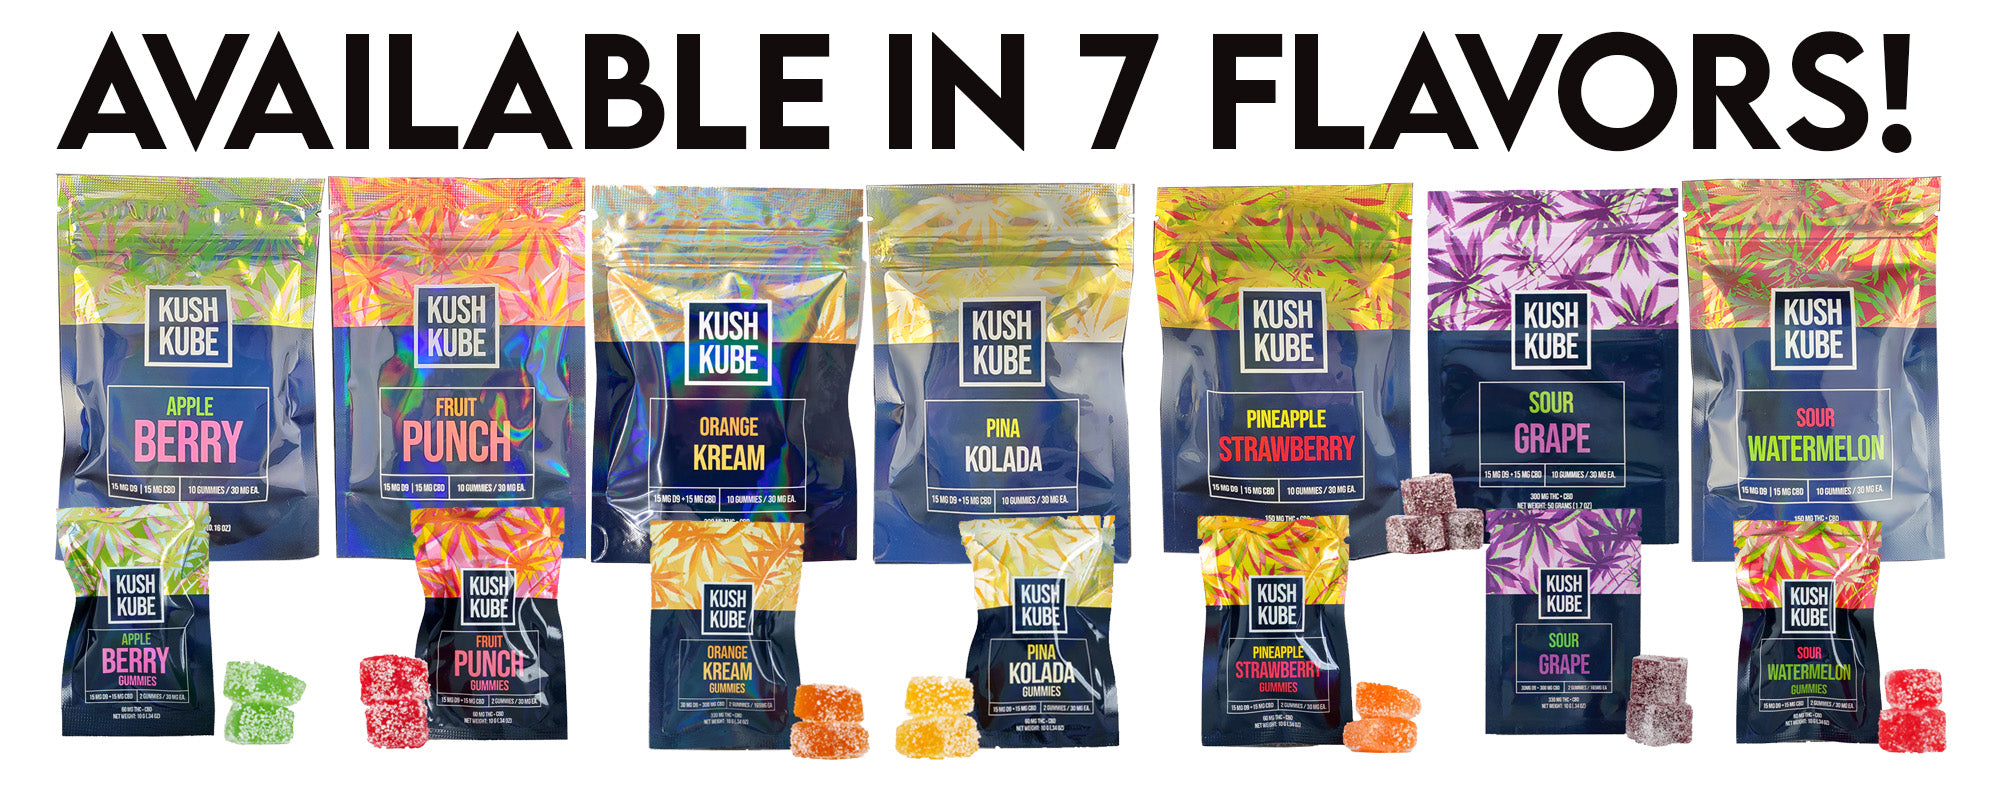 Kush Kubes are available in 7 Flavors!